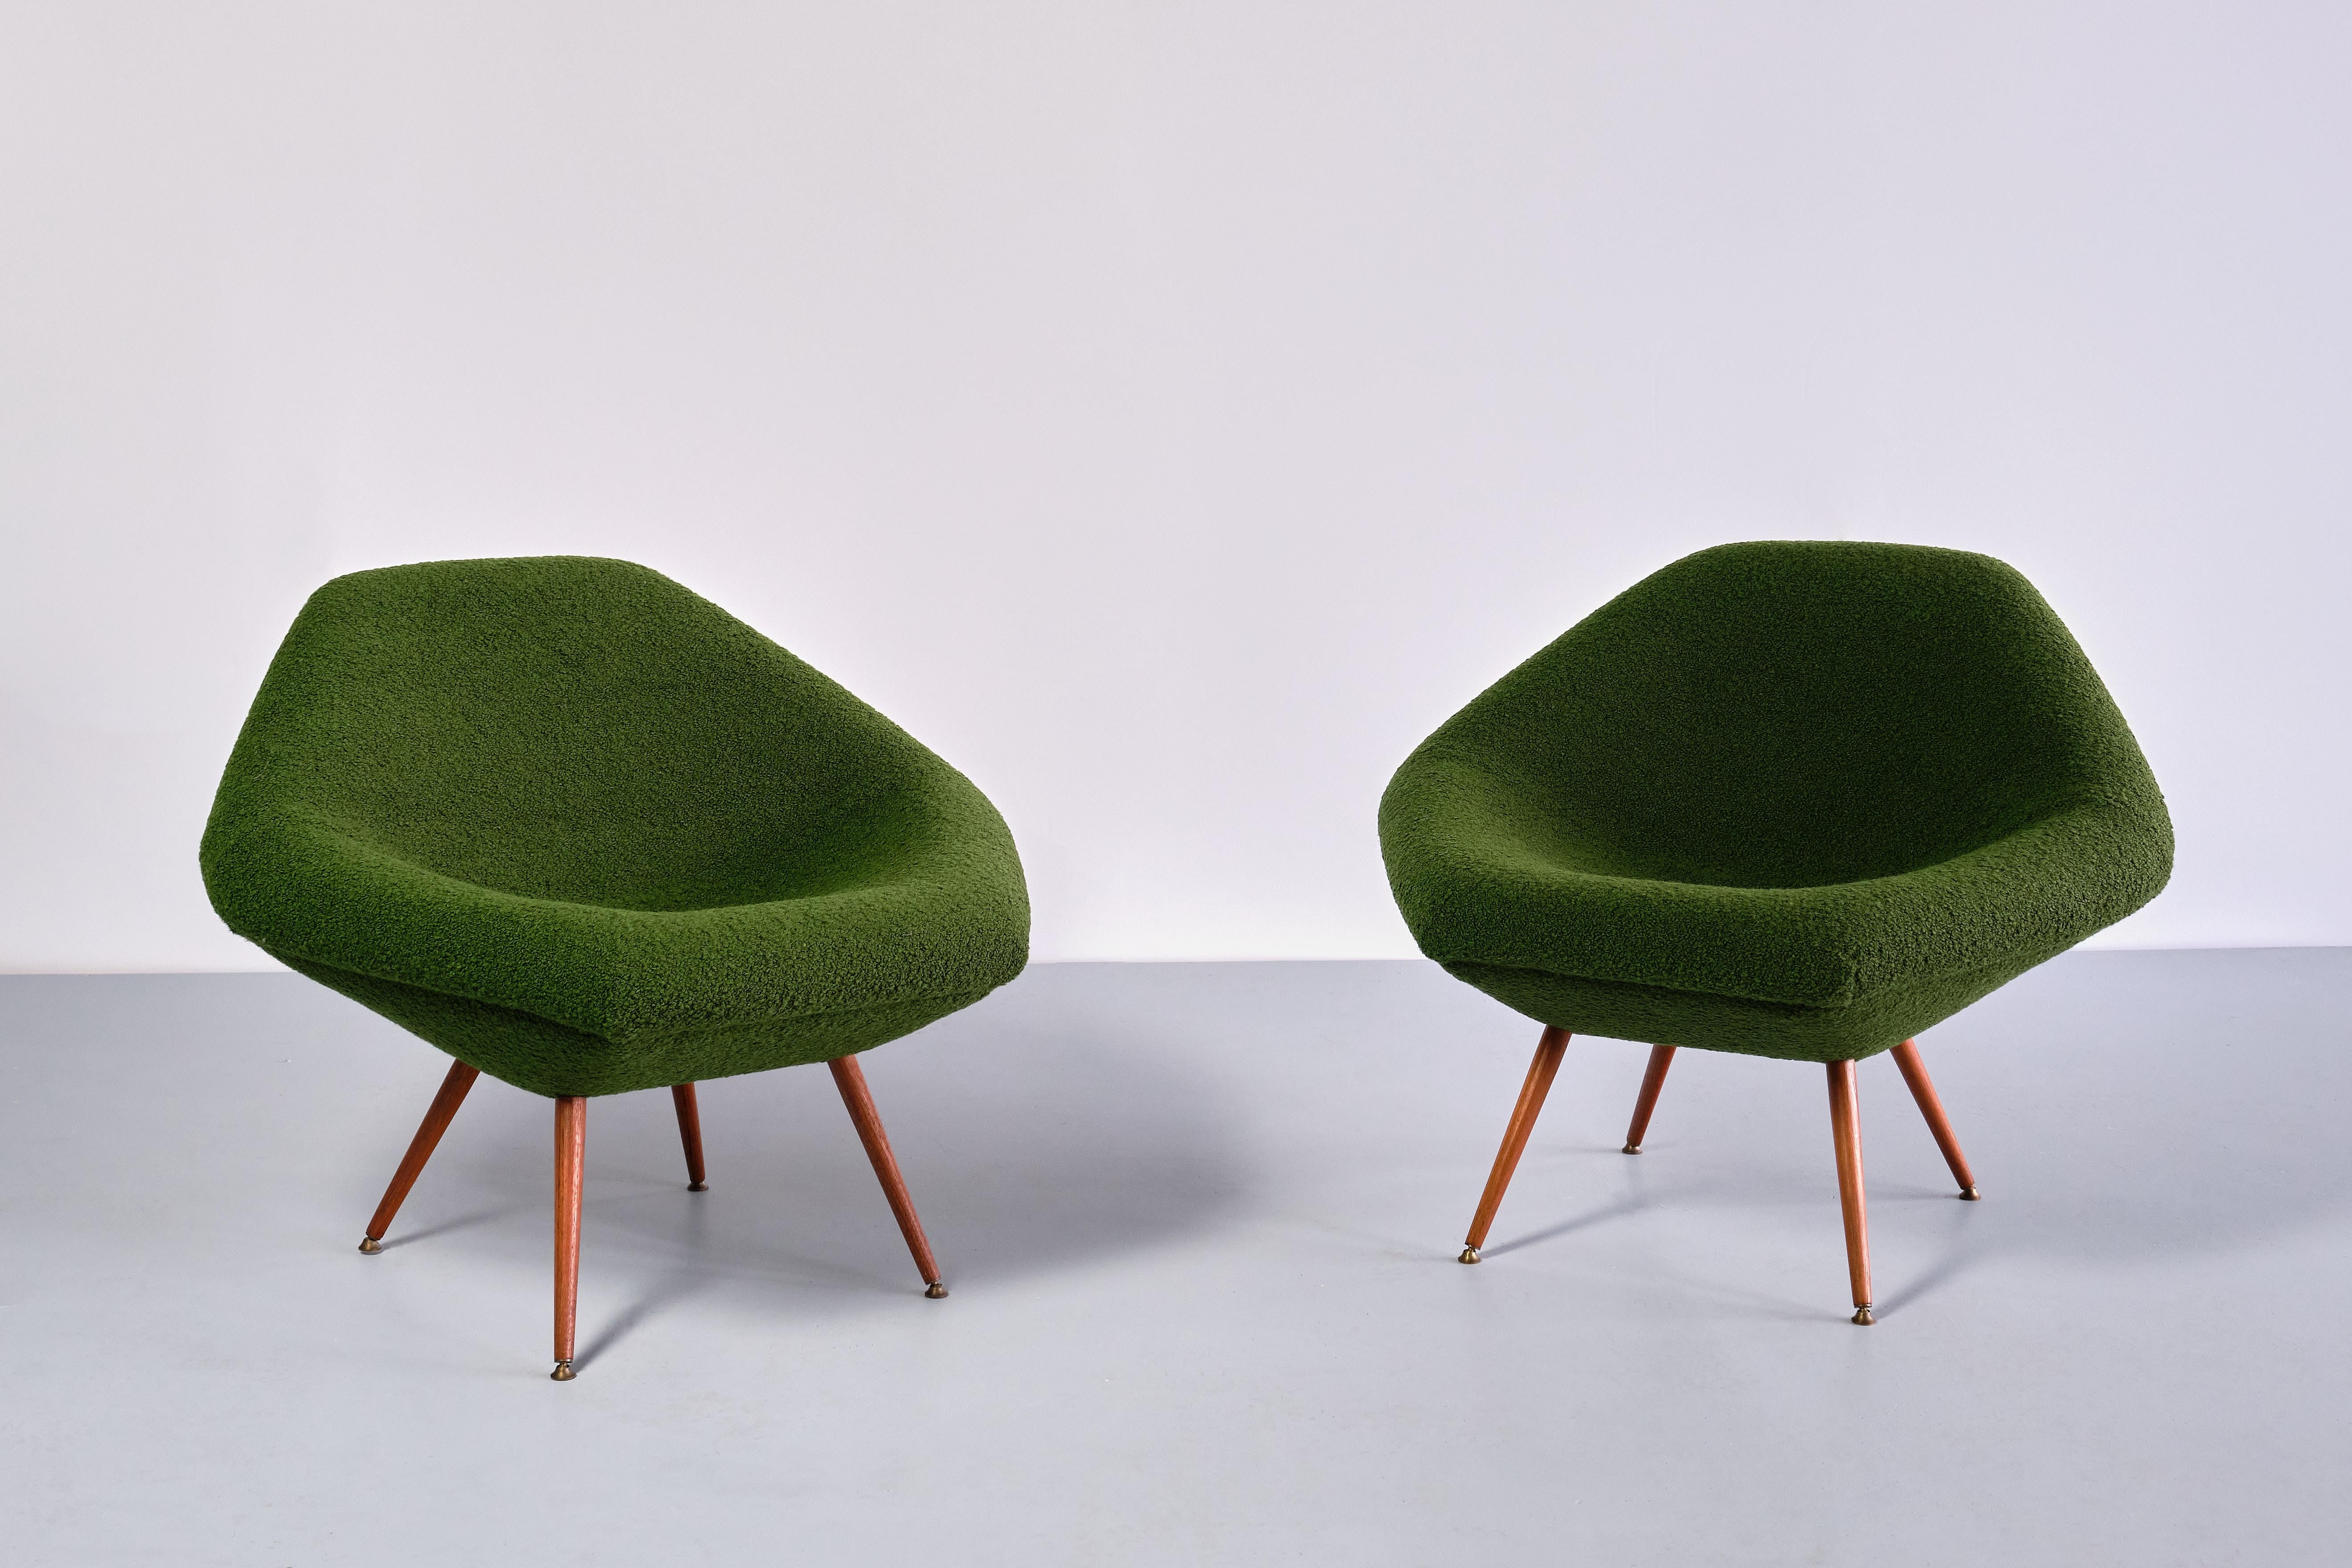 This rare pair of lounge chairs was designed by Arne Dahlén in the early 1960s. The model was called 'Eva' and was manufactured by his company, Dahléns Company in the Swedish town Dalum. The company was solely devoted to the production of chairs. 